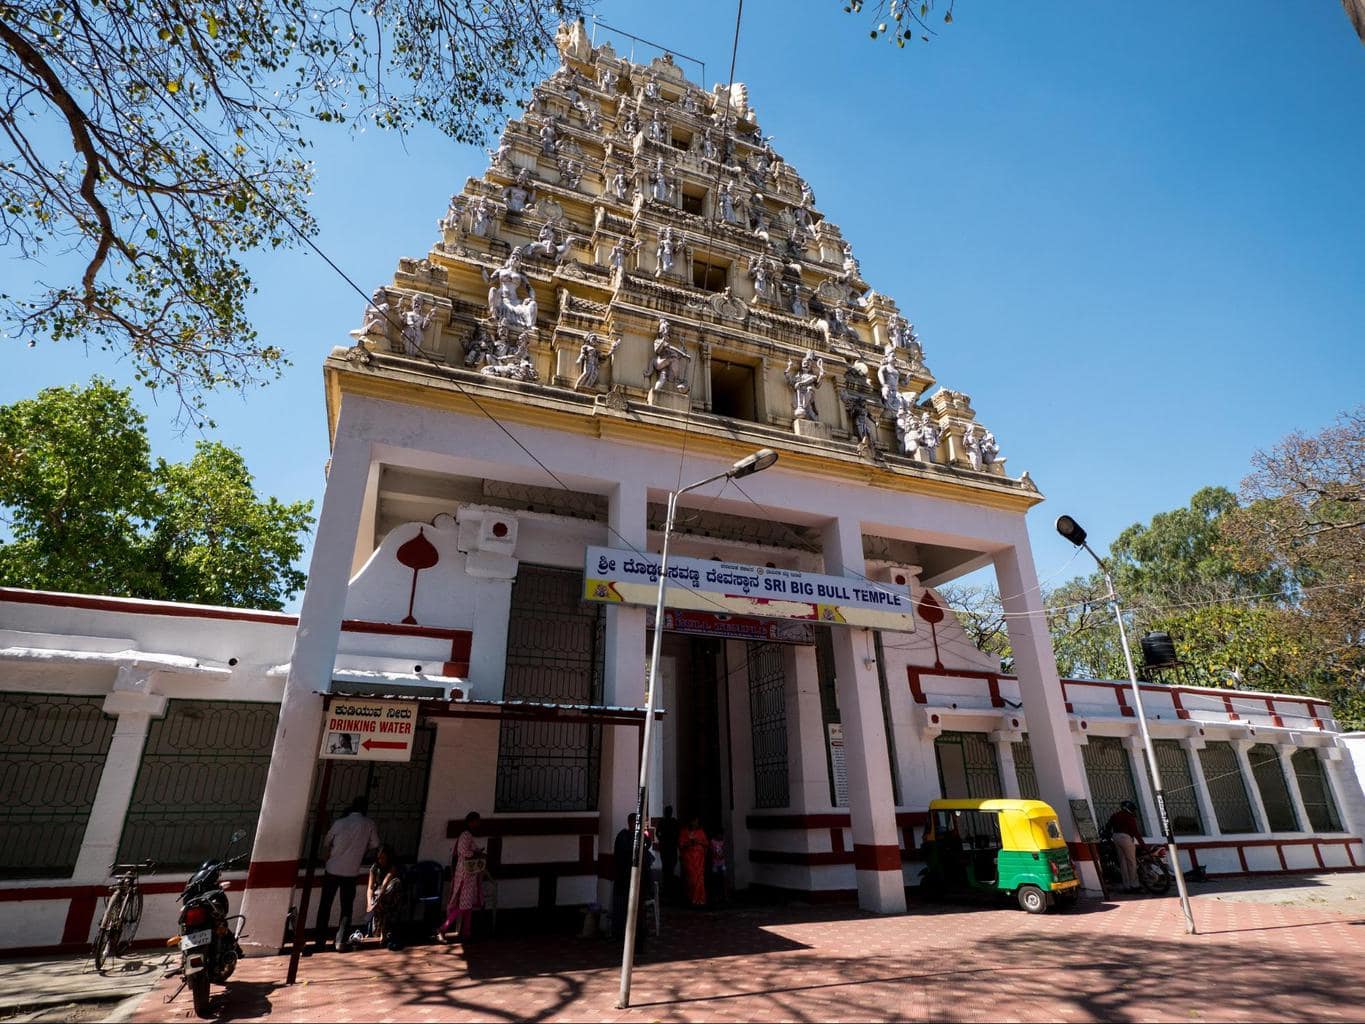 Entrance to the Bull Temple